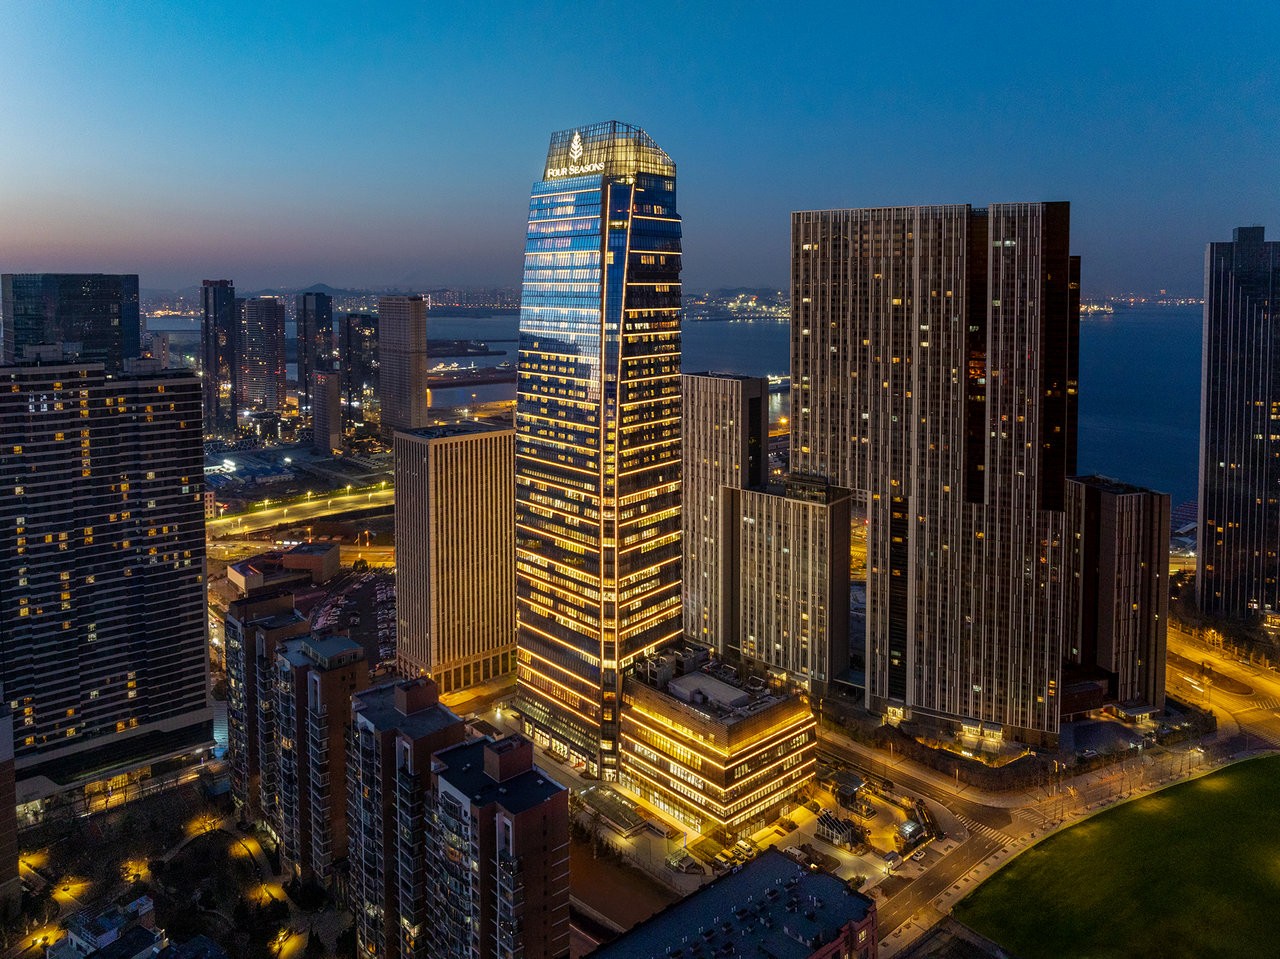 Four Seasons Hotel Dalian Debuts with Luxury Style & Personalized Service